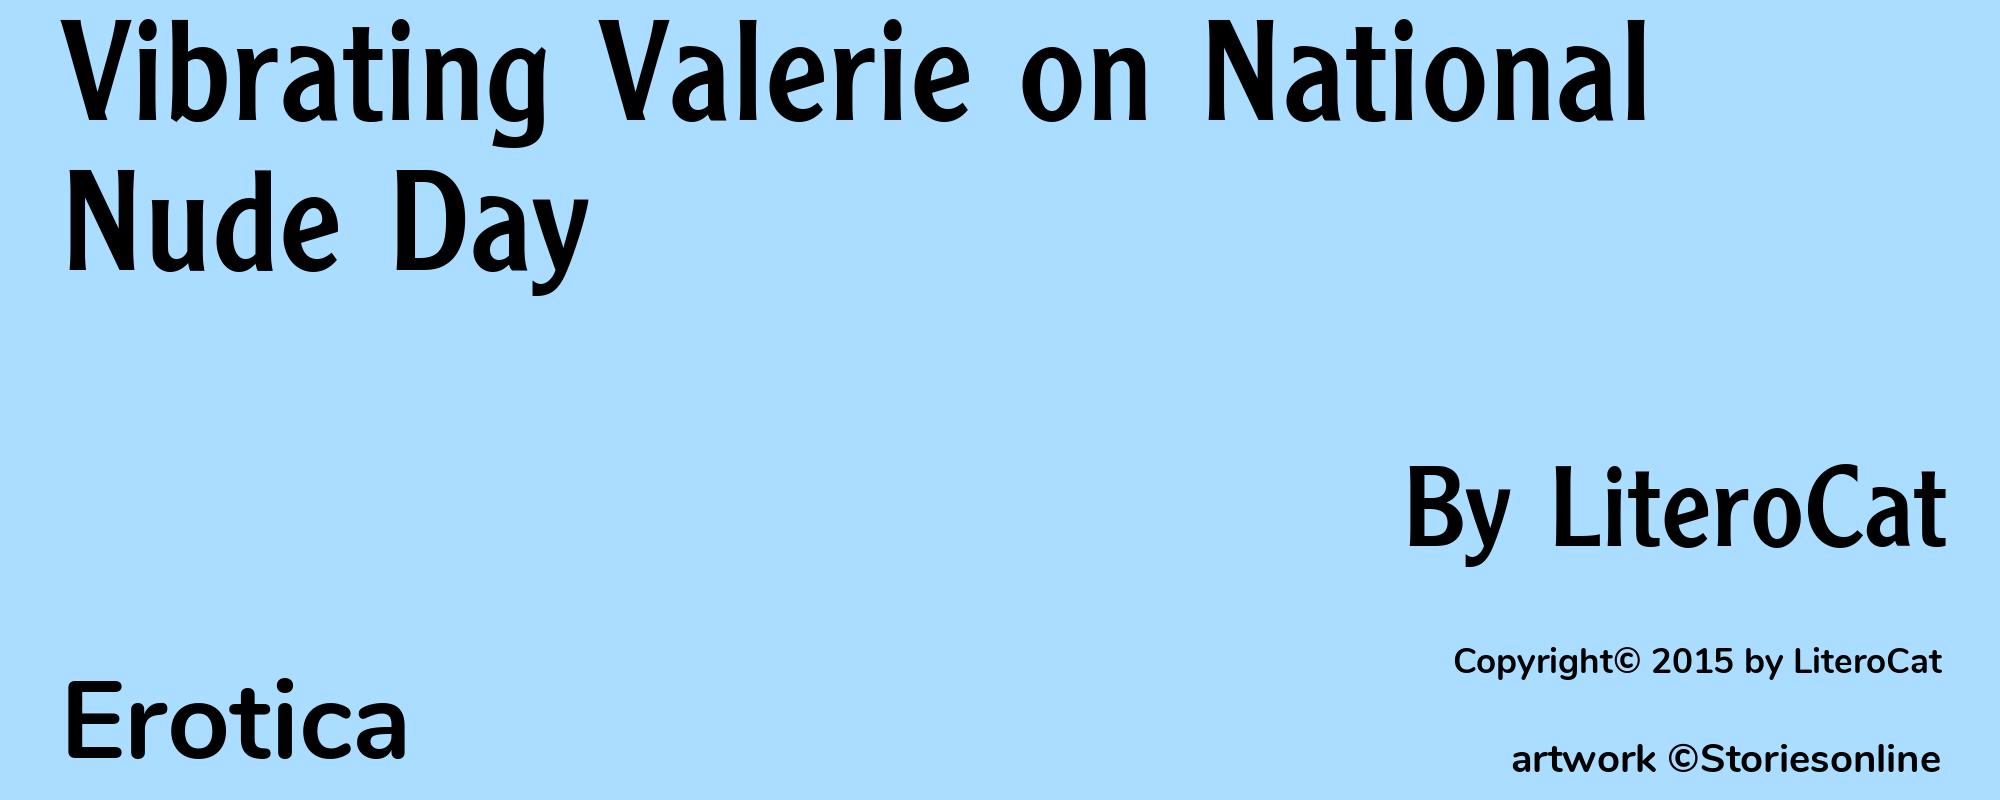 Vibrating Valerie on National Nude Day - Cover